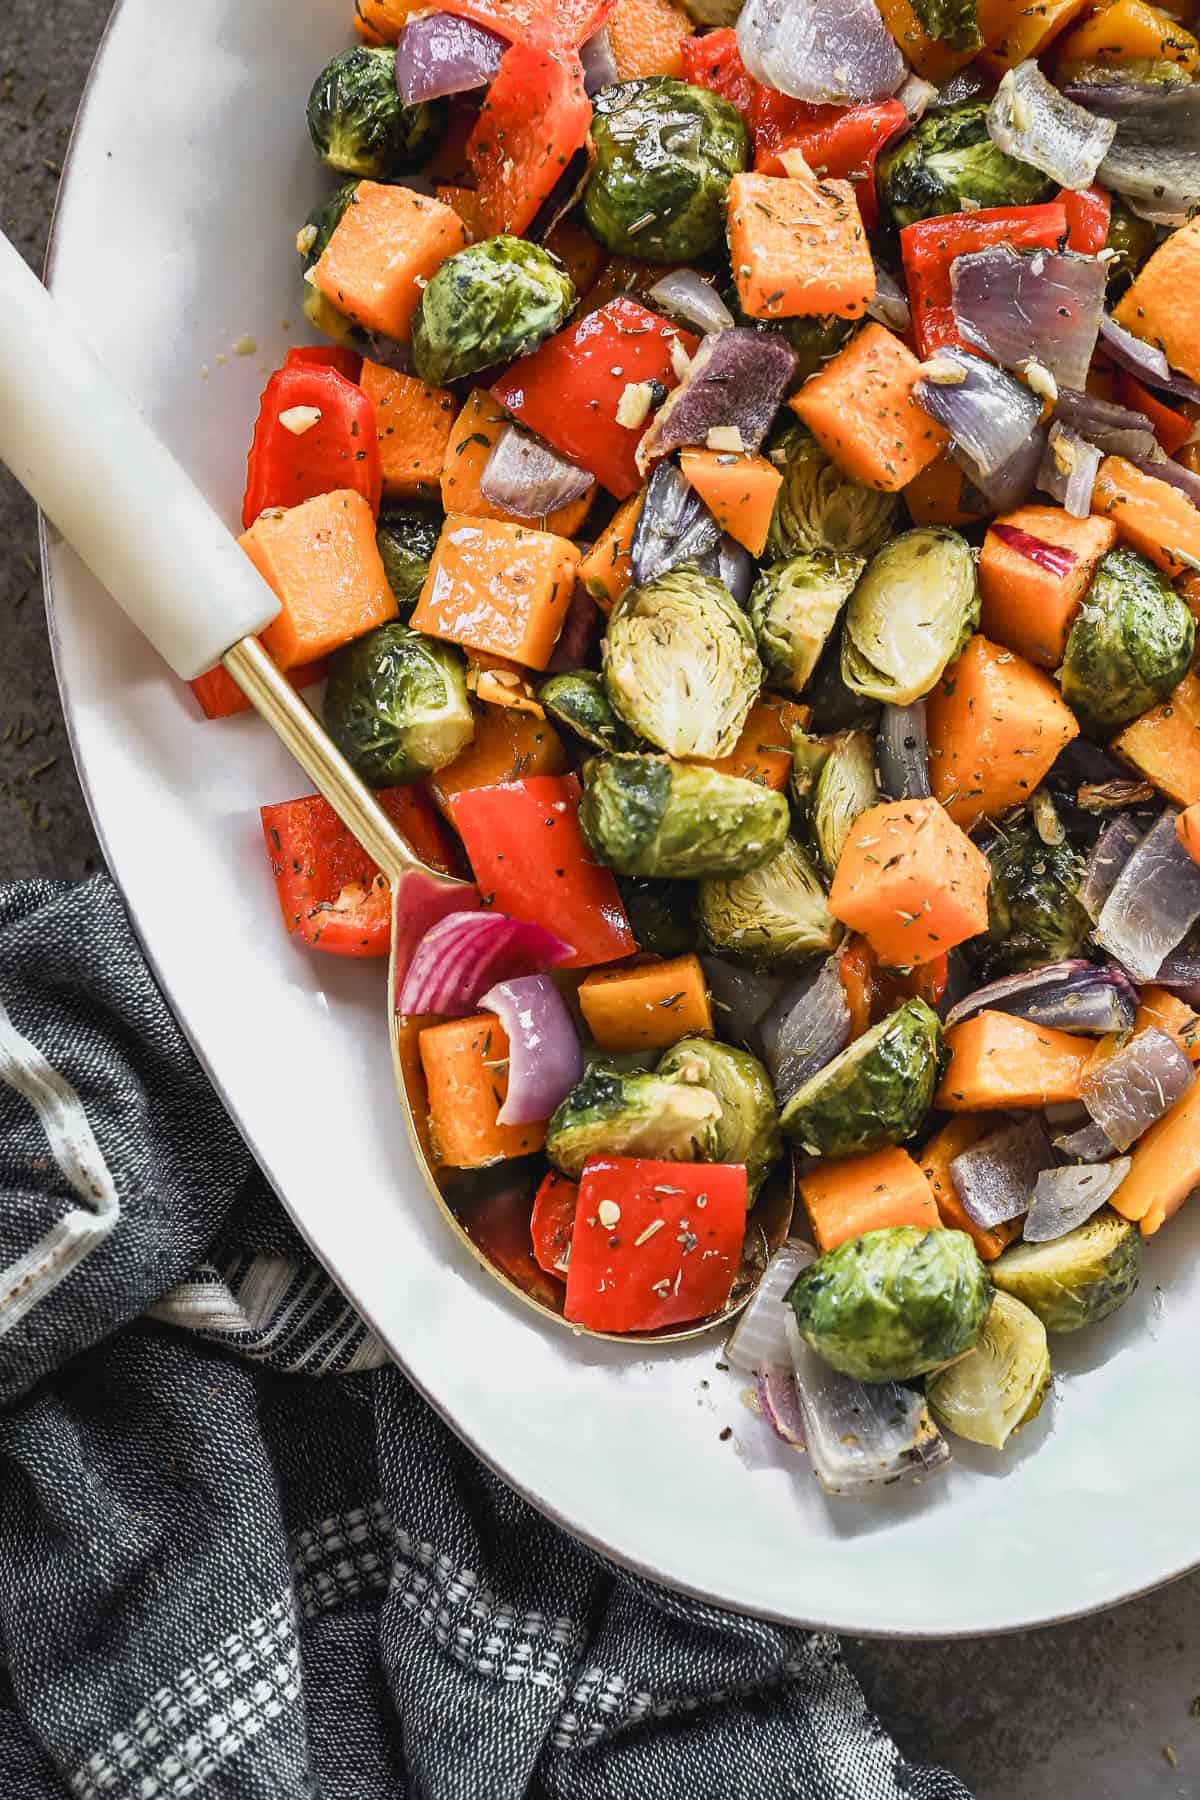 A gold serving spoon scooping up simple roasted vegetables.